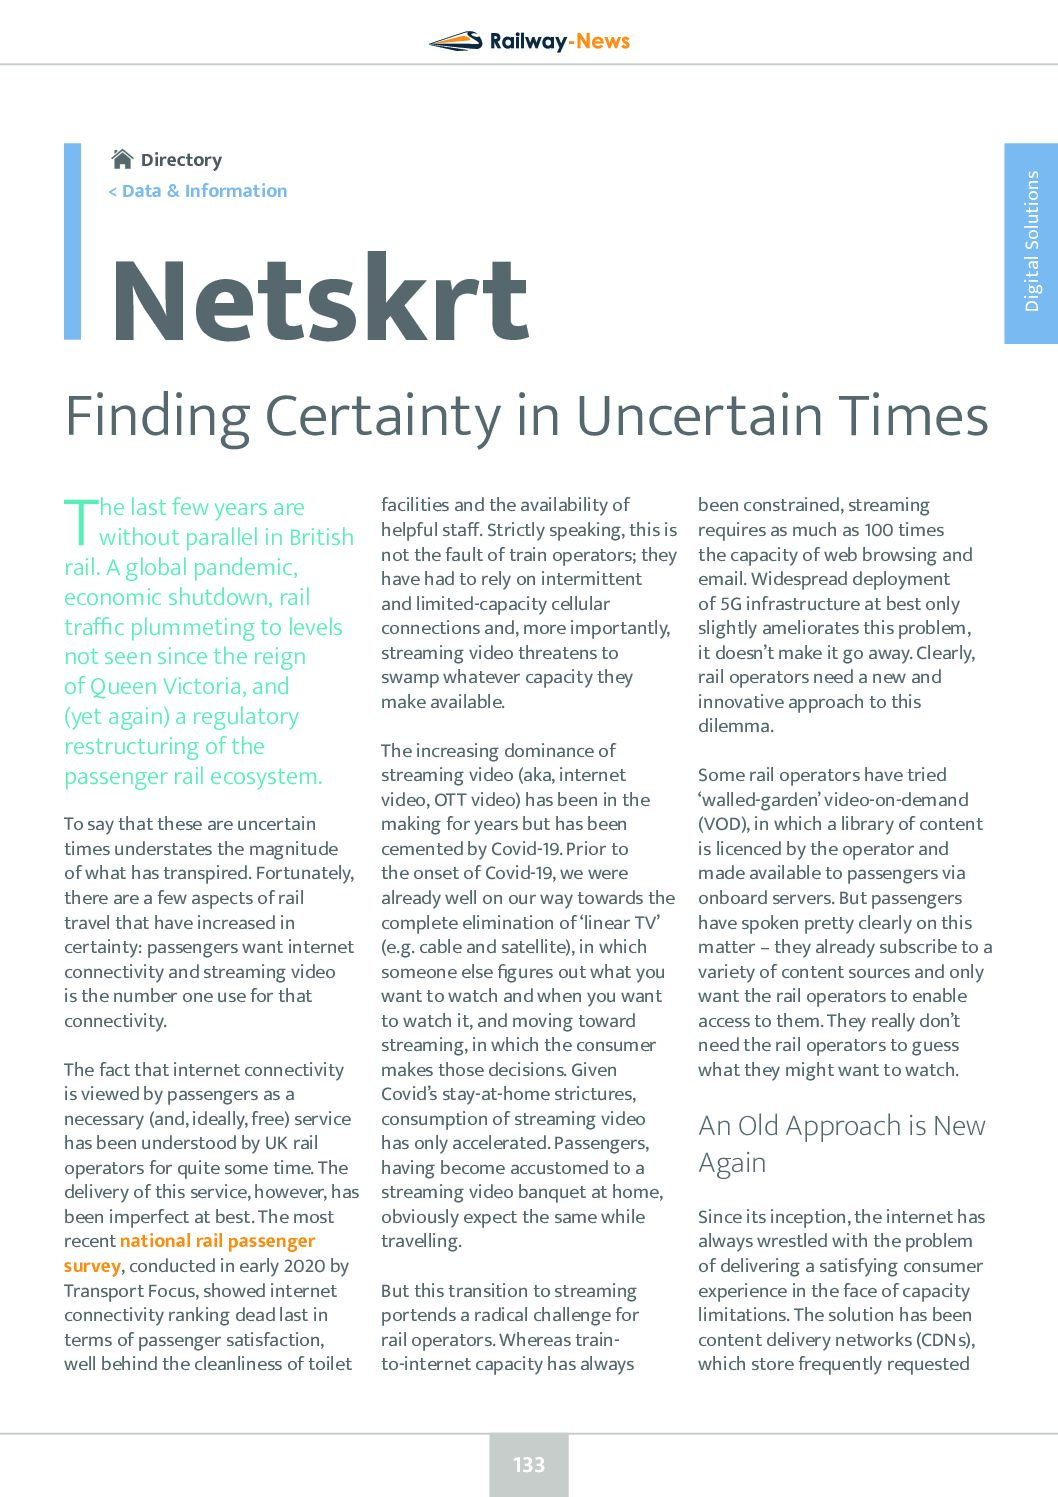 Finding Certainty in Uncertain Times